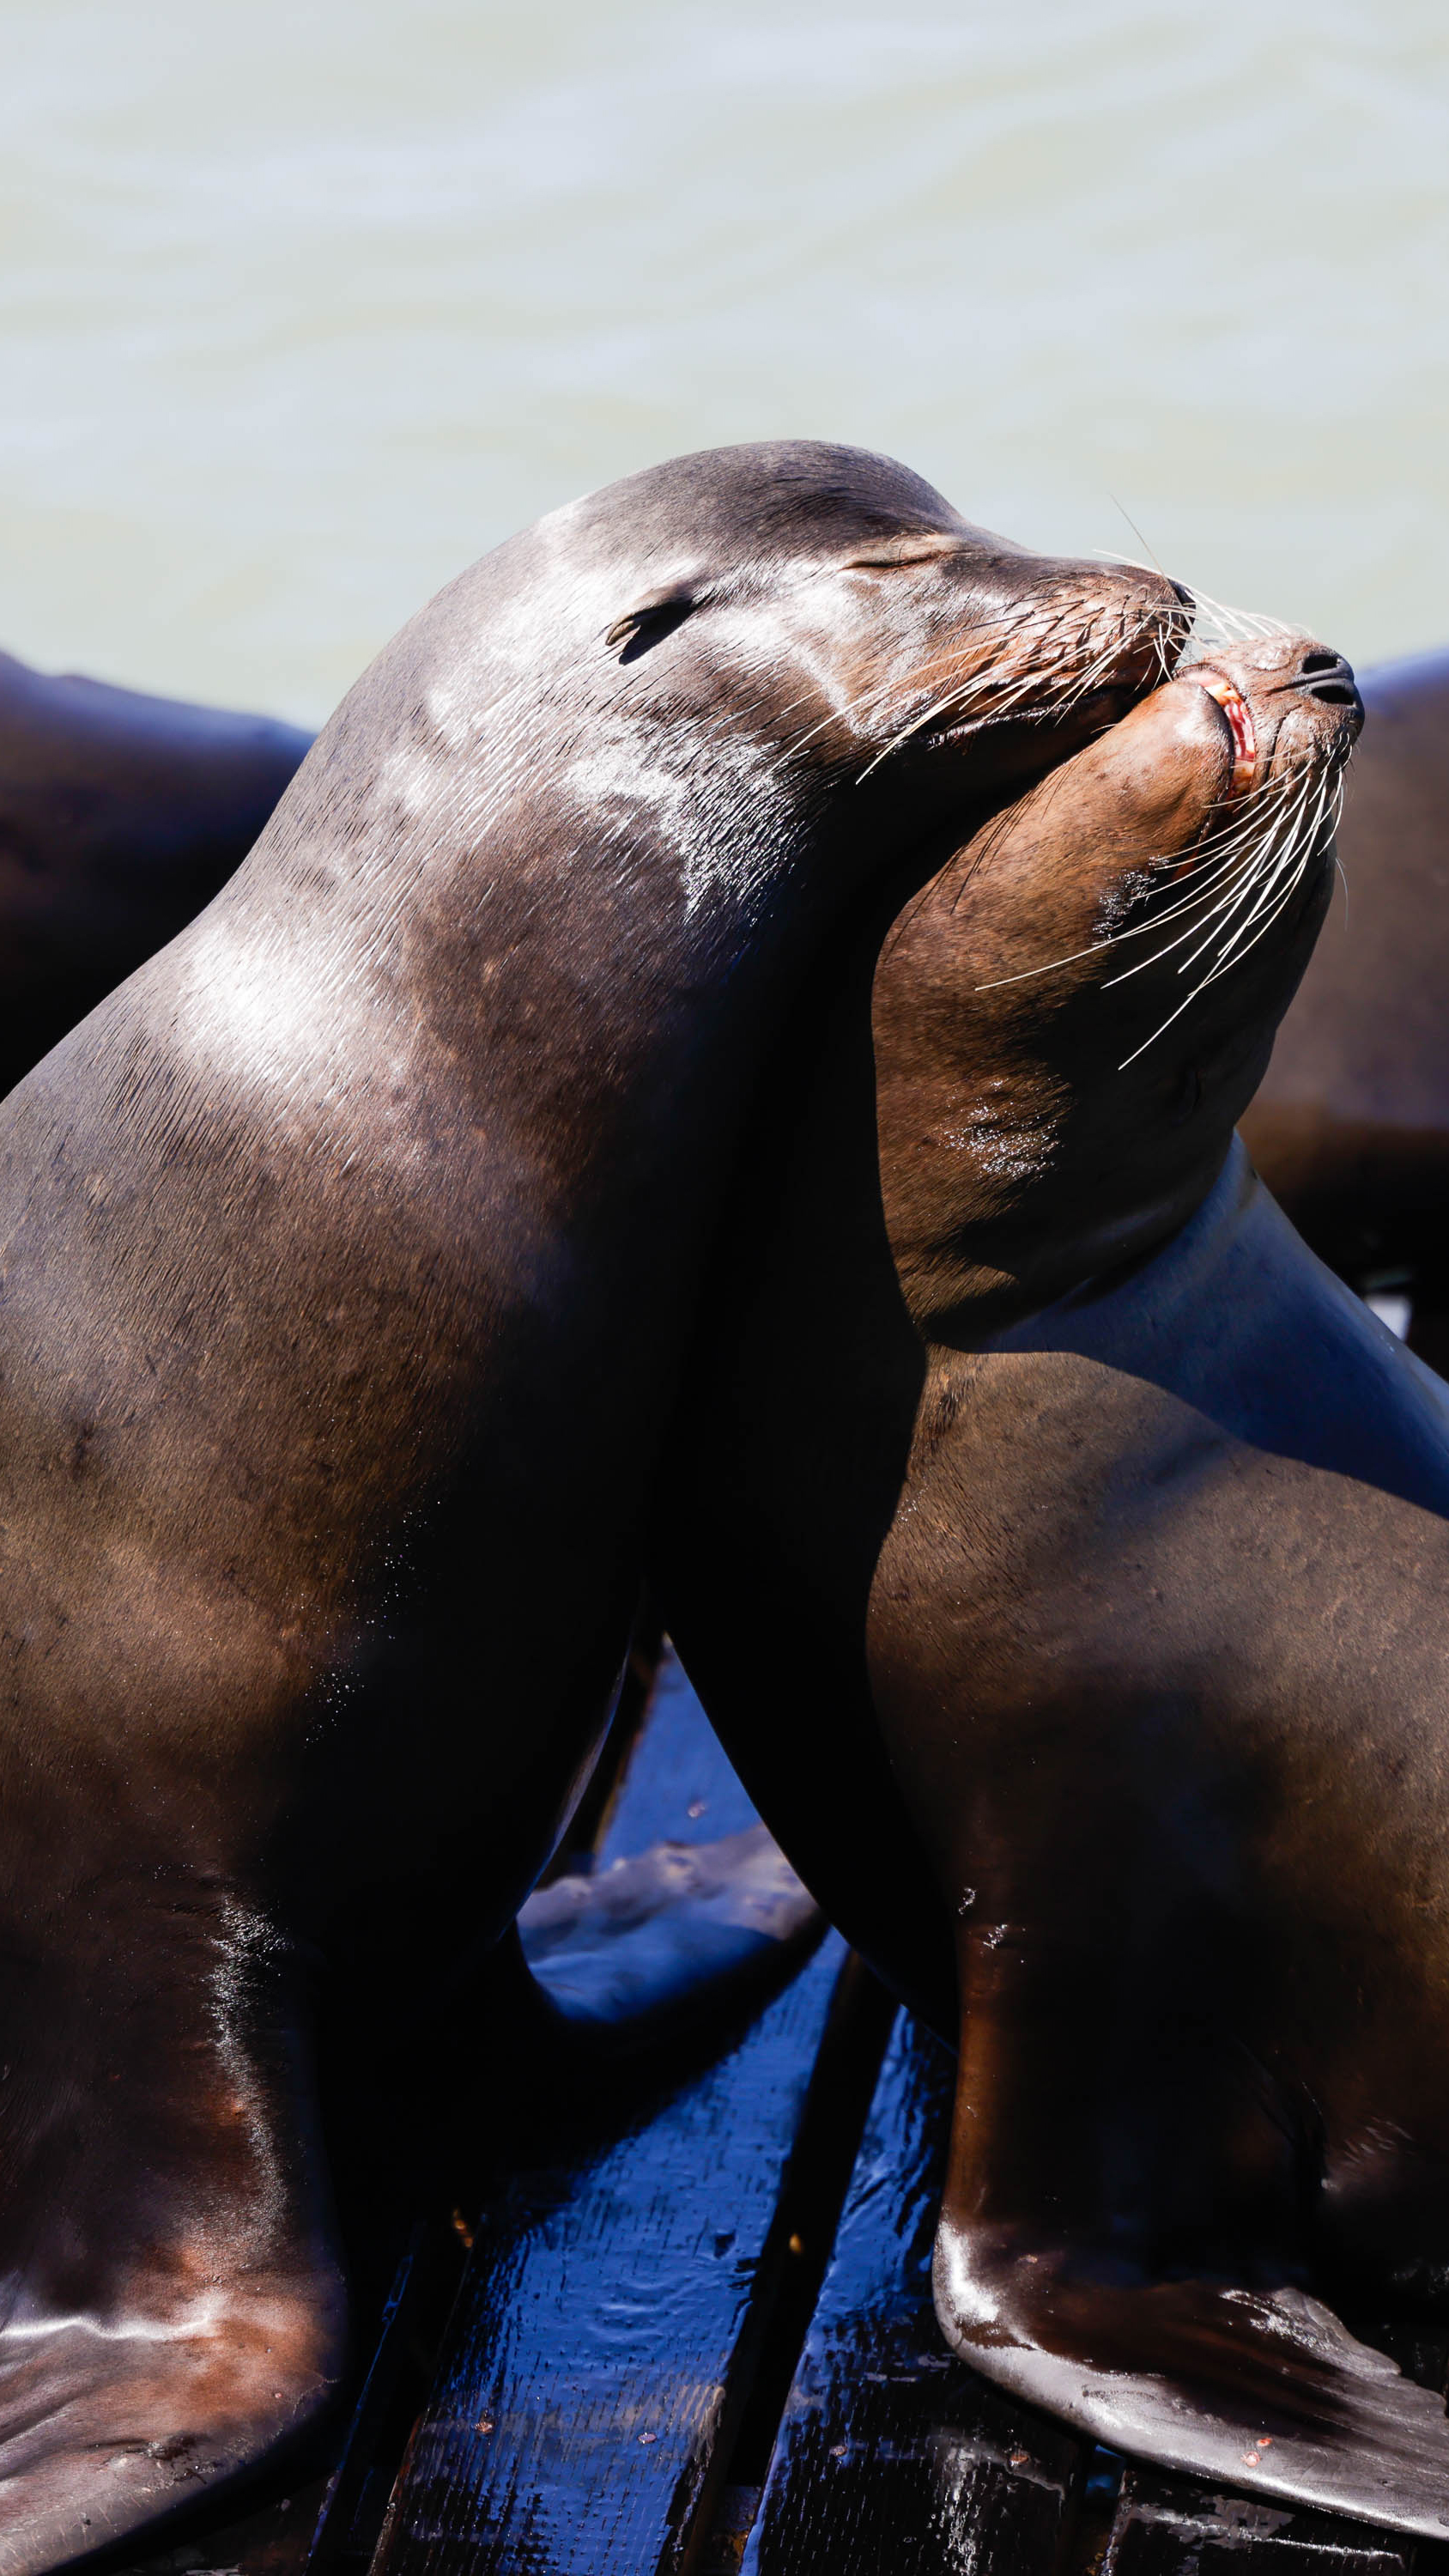 A sea lion nuzzling another on a dock, with a water backdrop.